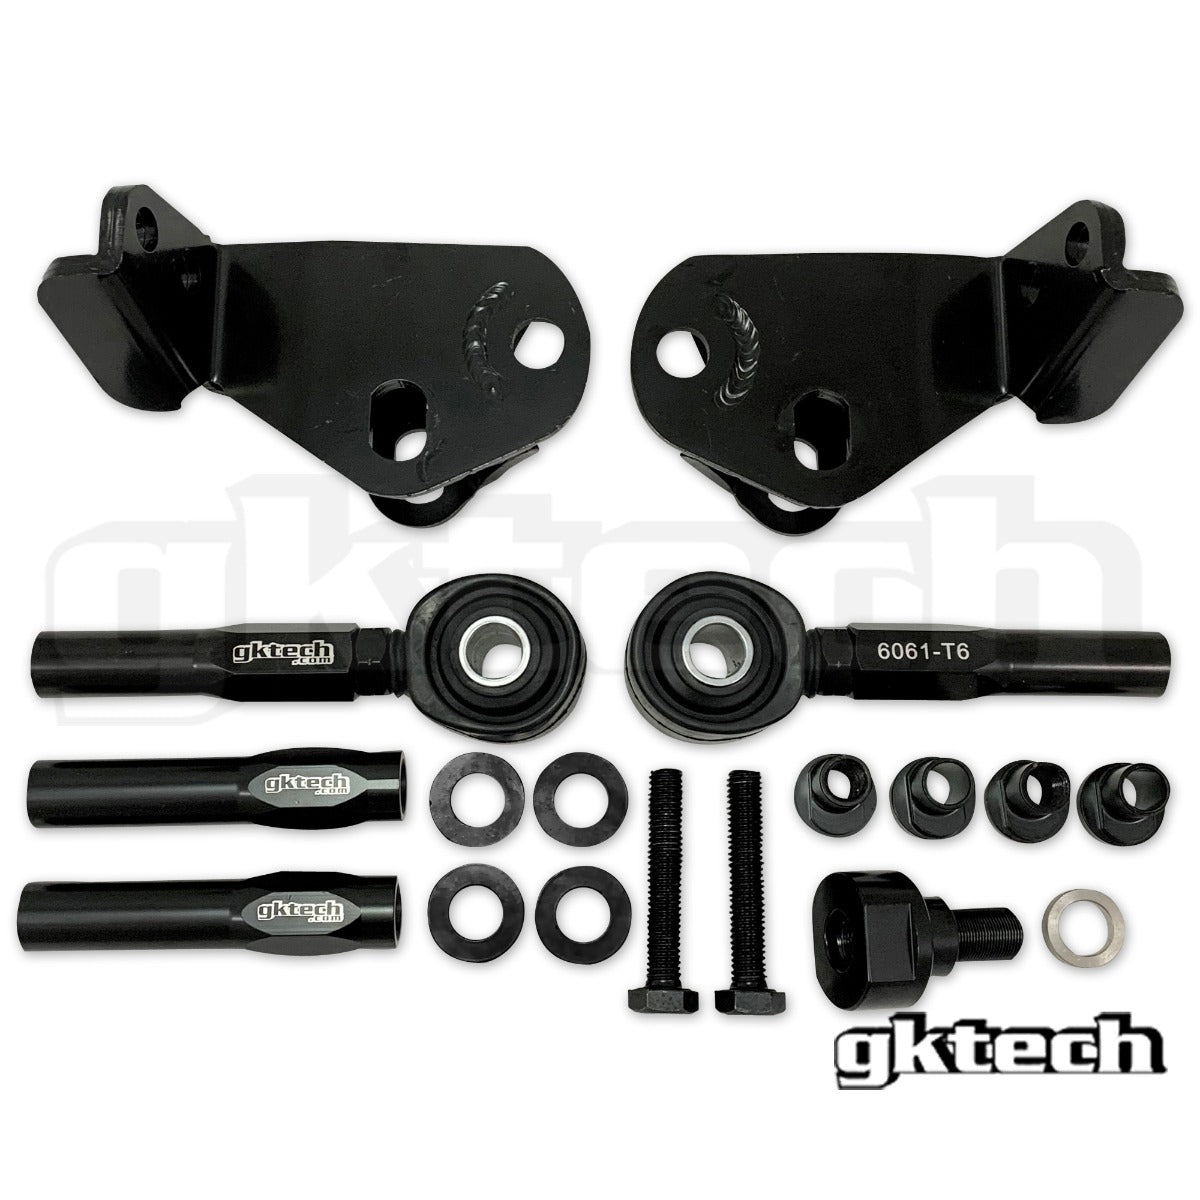 GKTECH 350Z/G35 Steering Angle Kit Side Perspective - Precision Engineered for Drift and Grip